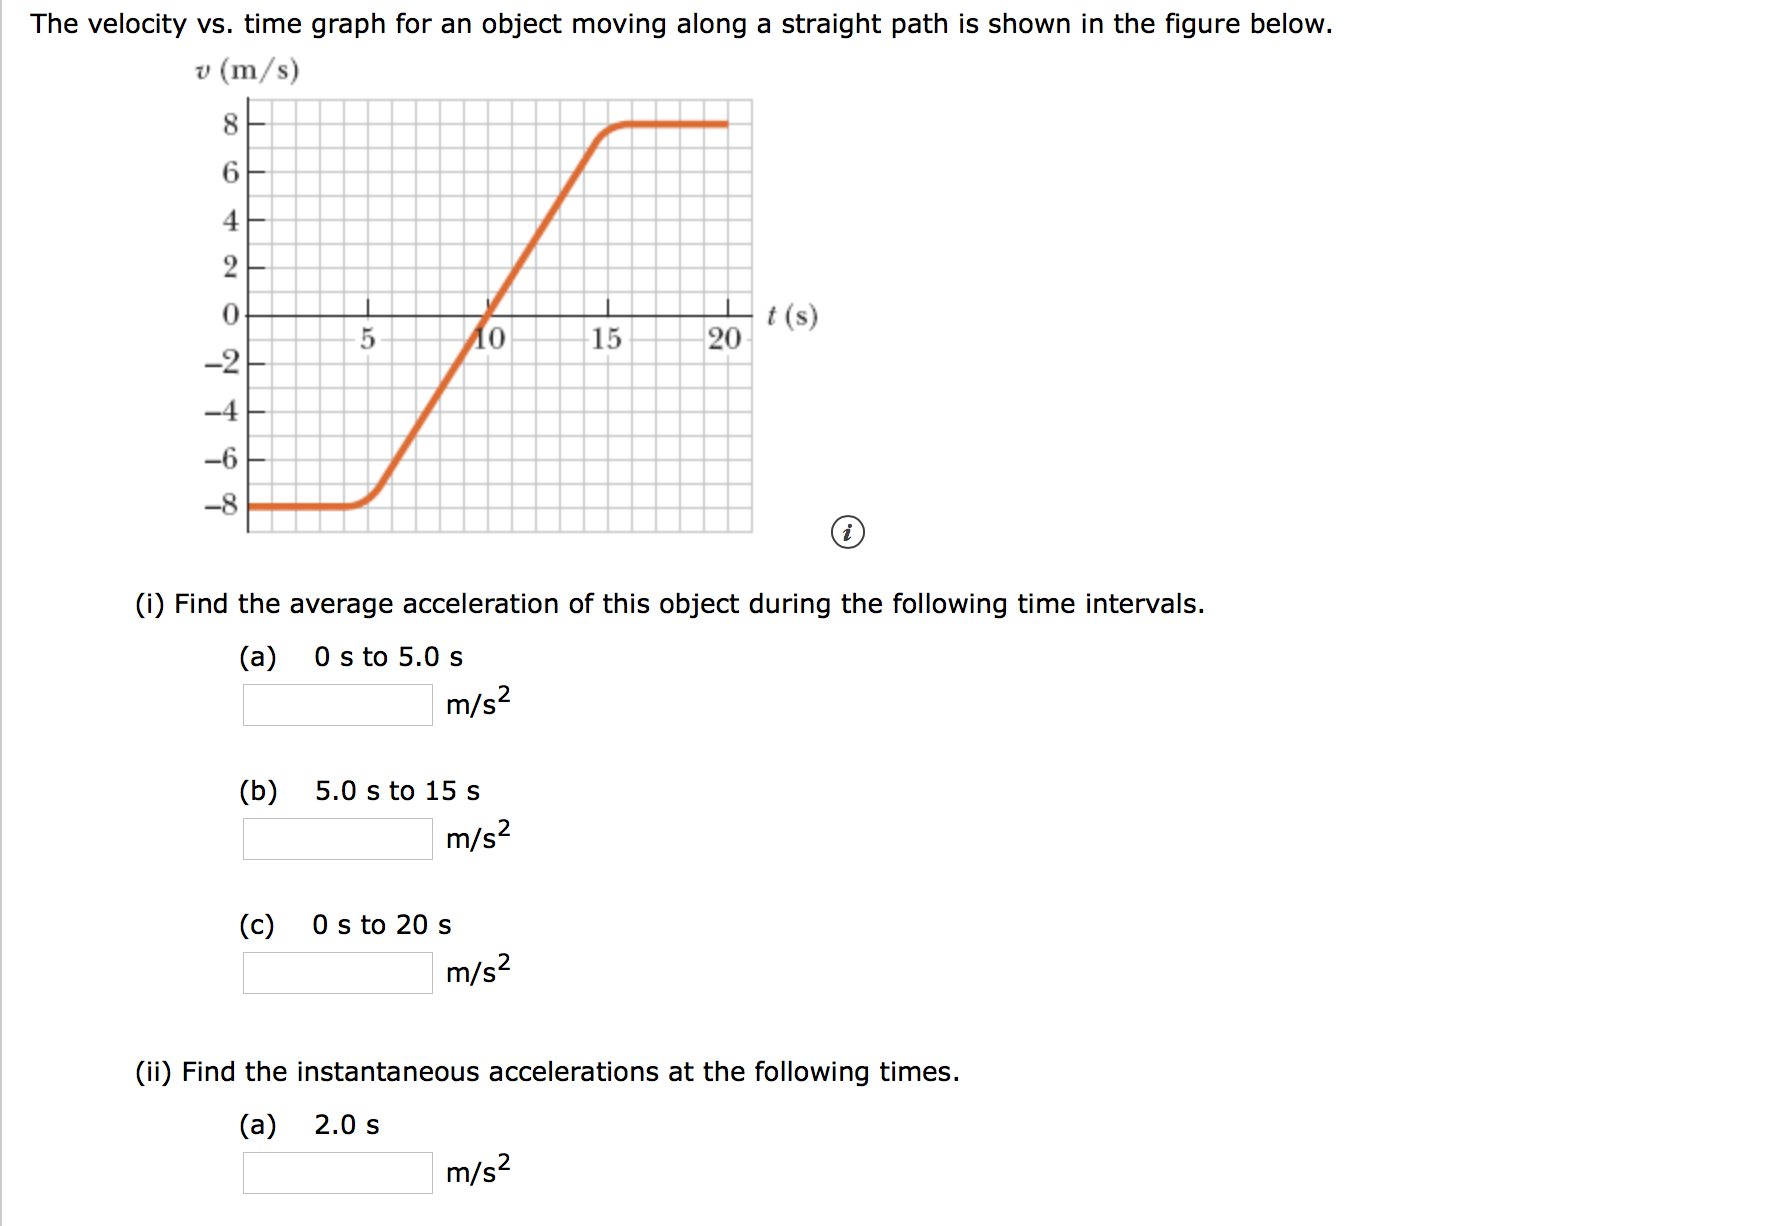 The velocity vs. time graph for an object moving along a straight path is shown in the figure below.
(m/s)
6
4
2
t(s)
20
15
10
-2
-4
-8
(i) Find the average acceleration of this object during the following time intervals.
0 s to 5.0 s
(a)
m/s2
5.0 s to 15 s
(b)
m/s2
(c)
0 s to 20 s
m/s2
(ii) Find the instantaneous accelerations at the following times.
2.0 s
(a)
m/s2
